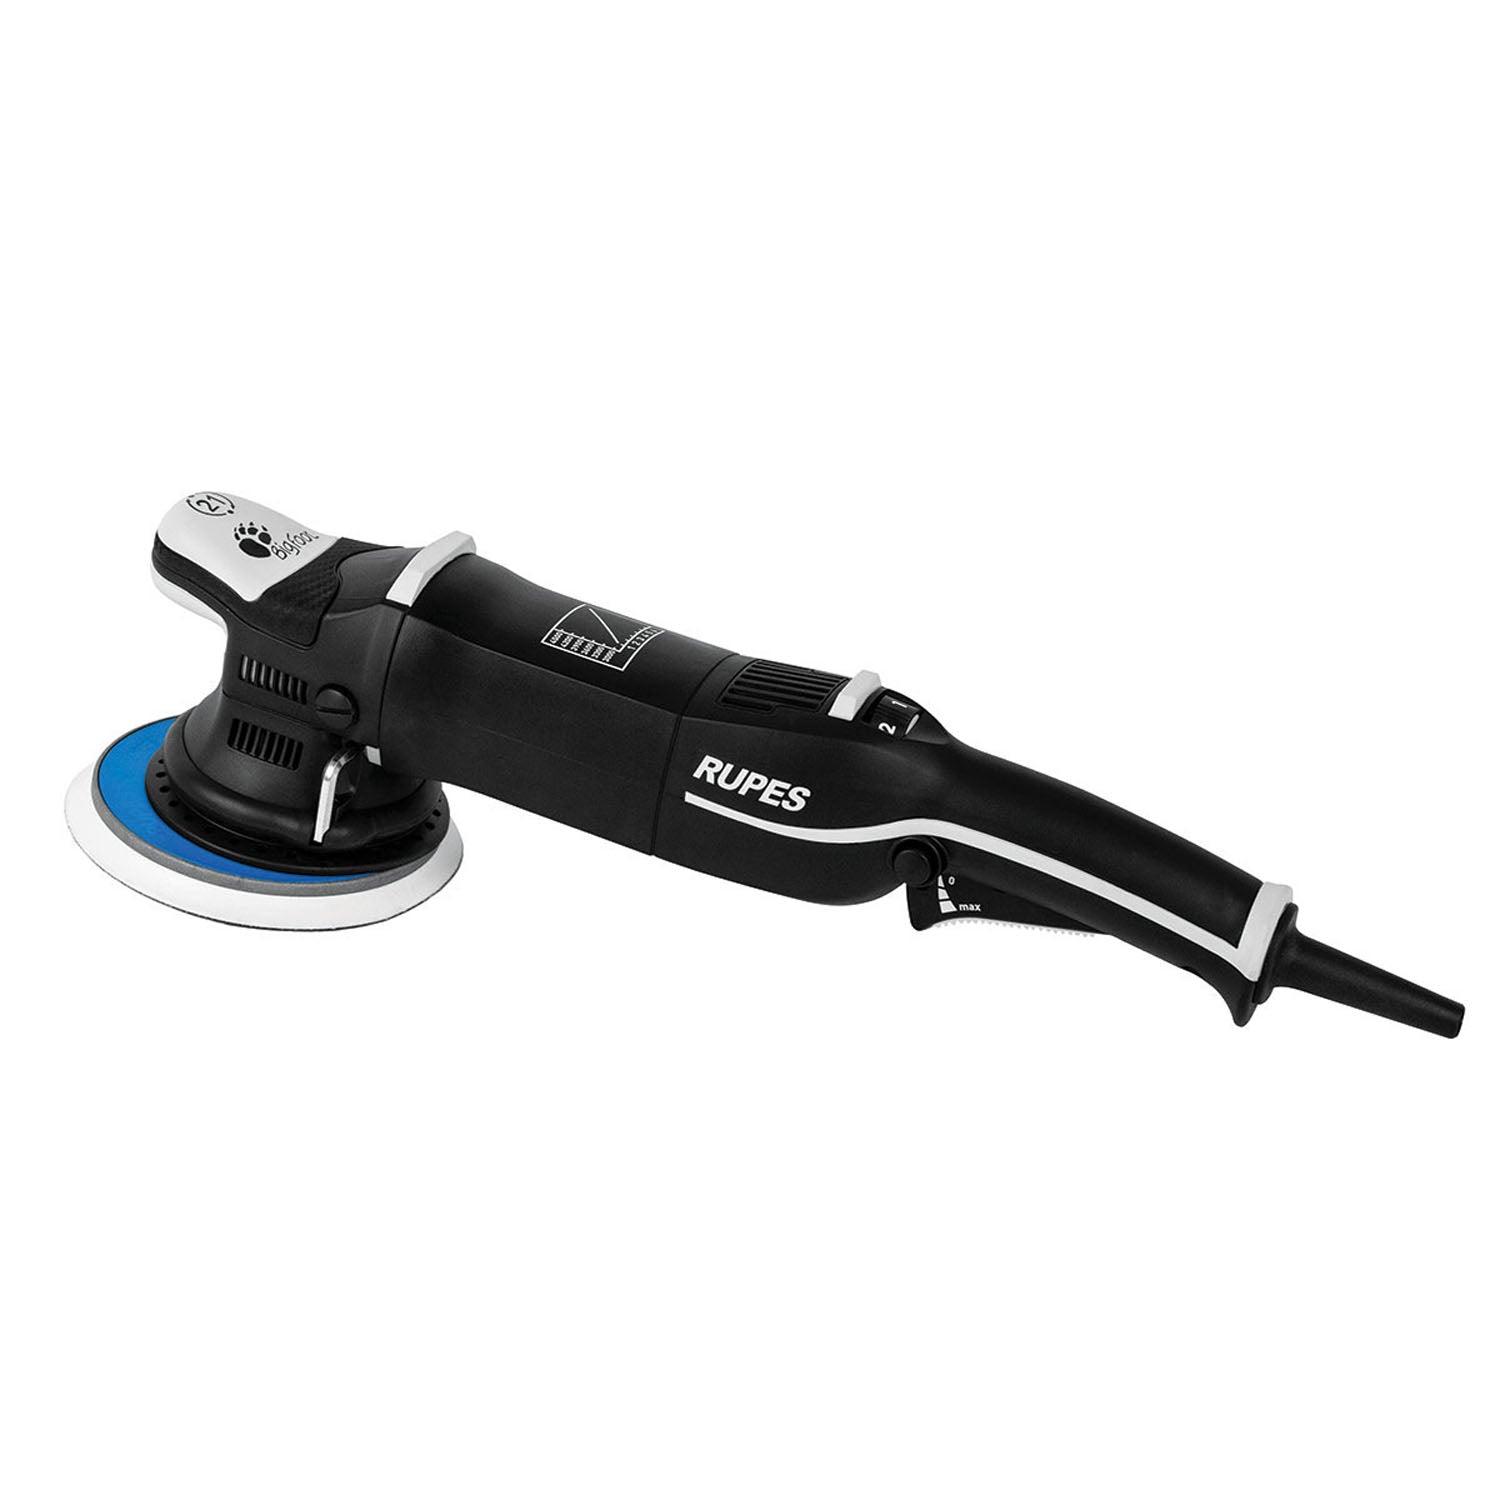 lhr21-mark-3-orbital-polisher-with-6-inch-backing-plate